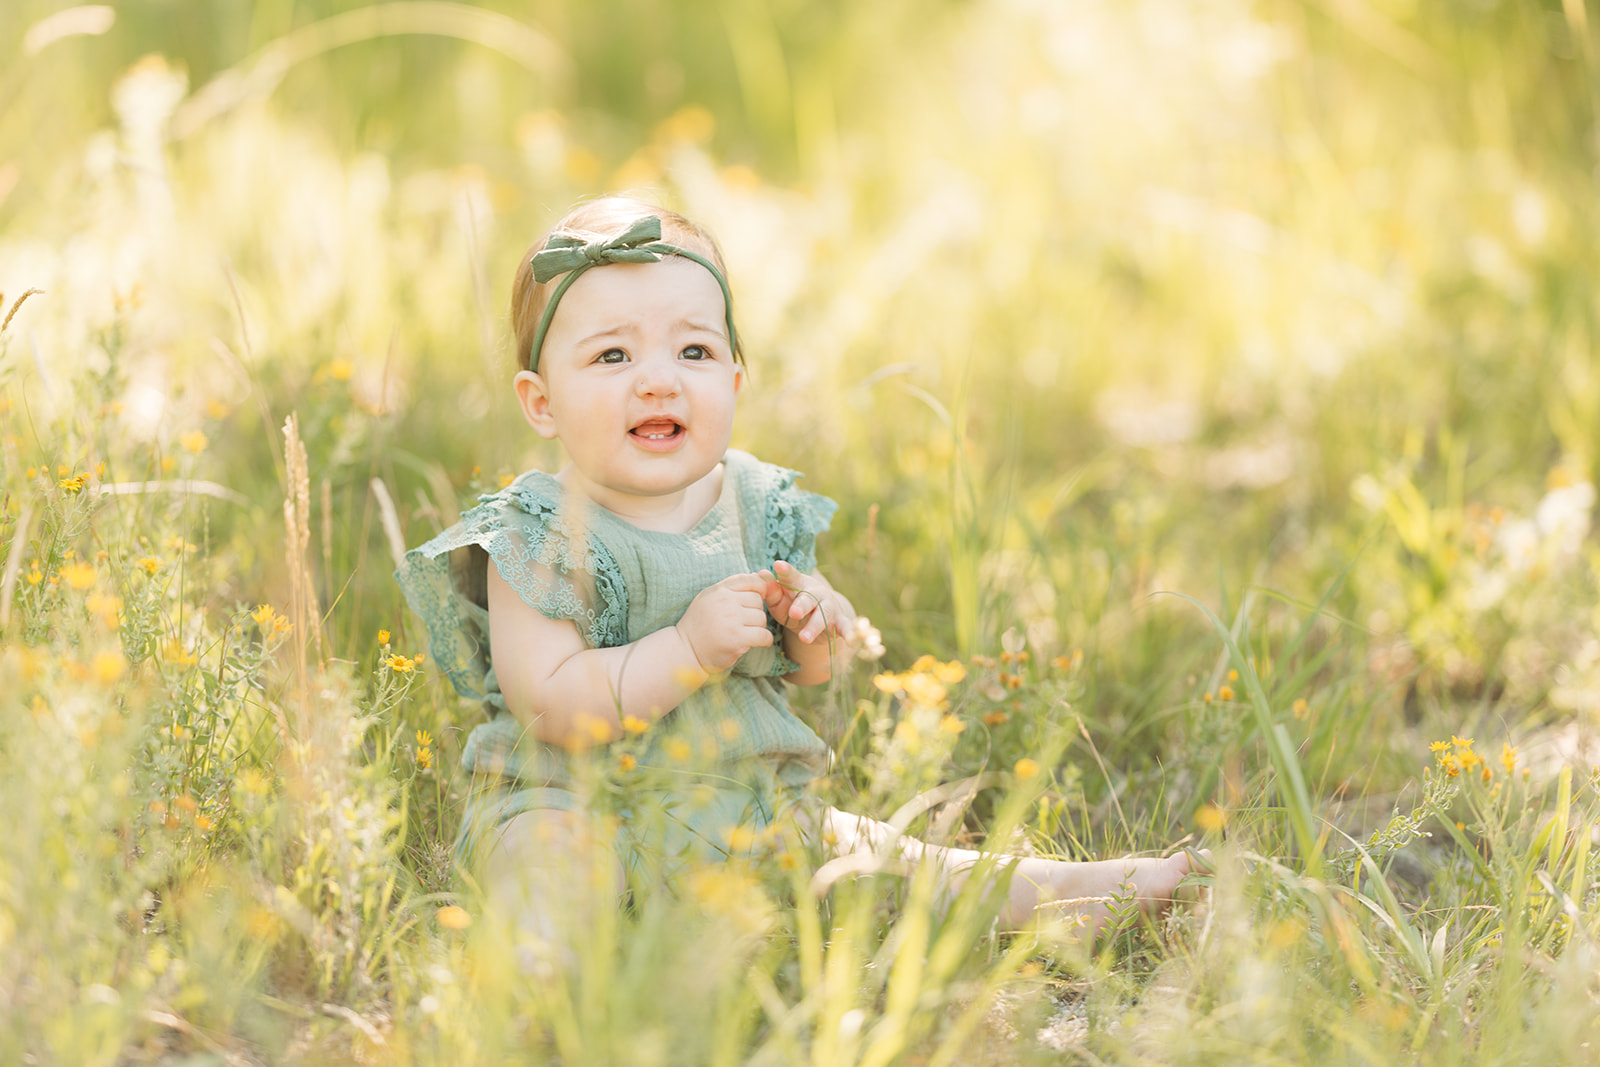 5 month baby milestone photos in castle rock colorado during summer at dawsons butte